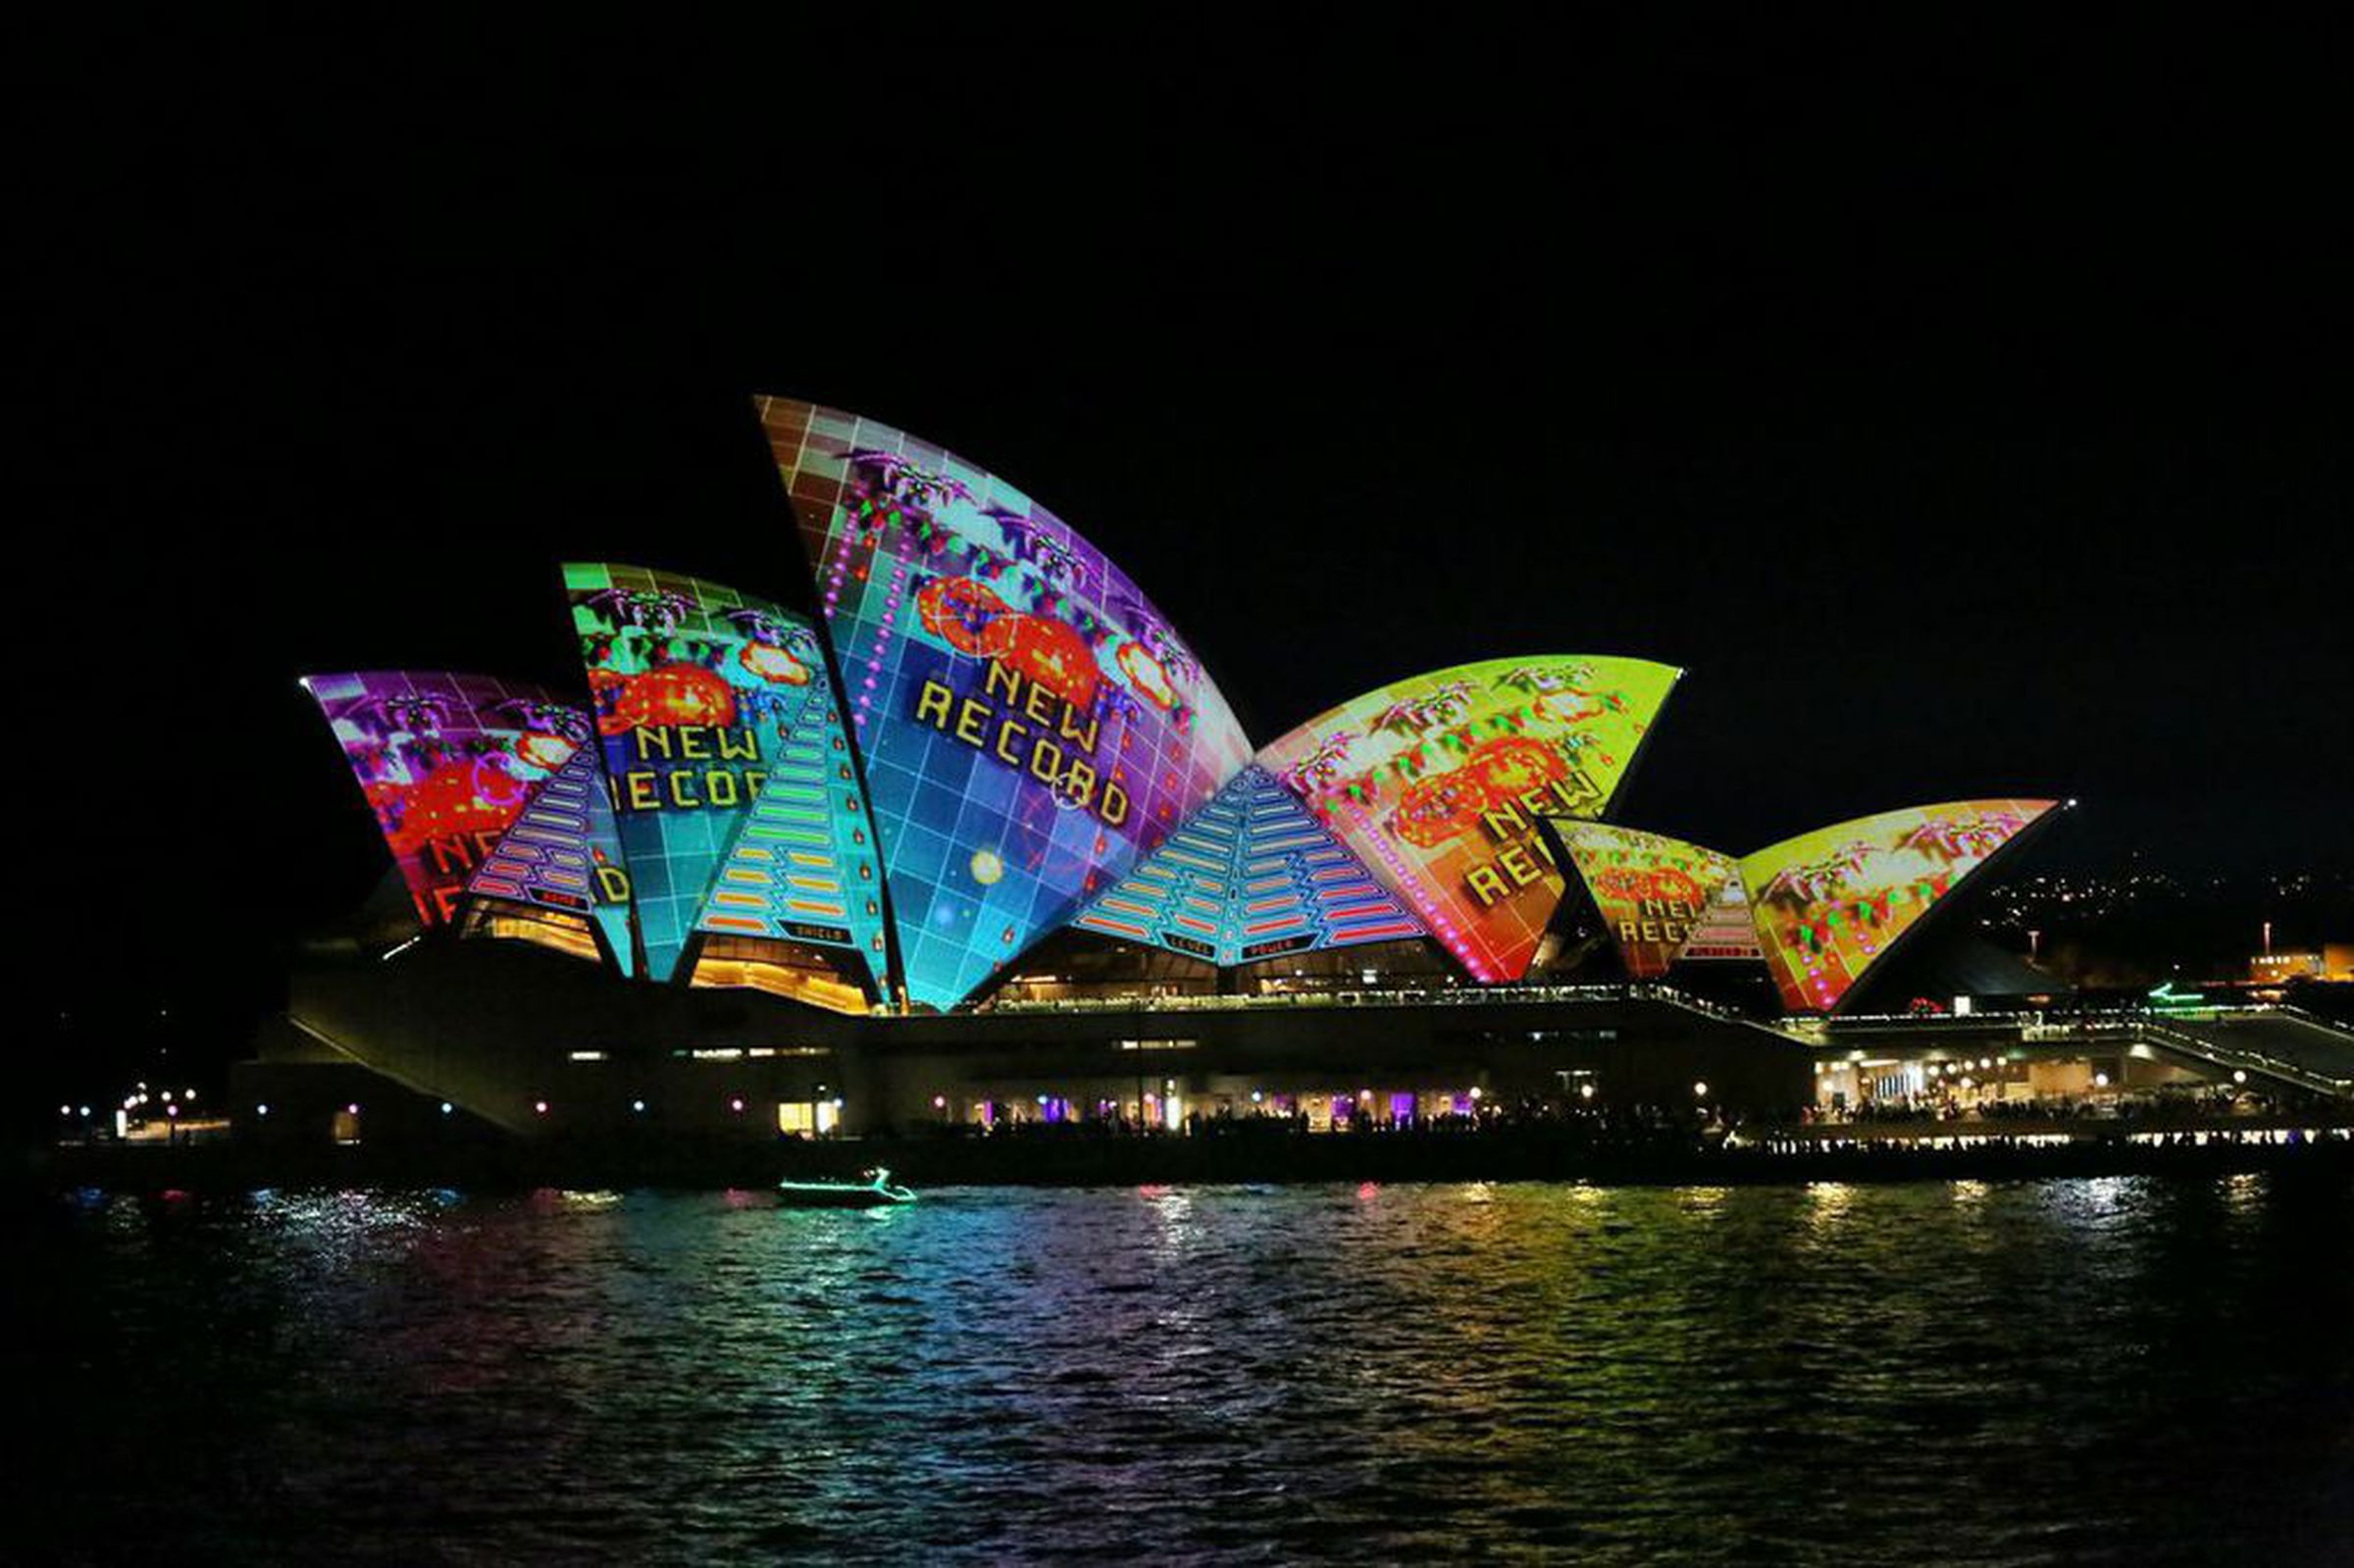 'Lighting the Sails' at the Sydney Opera House